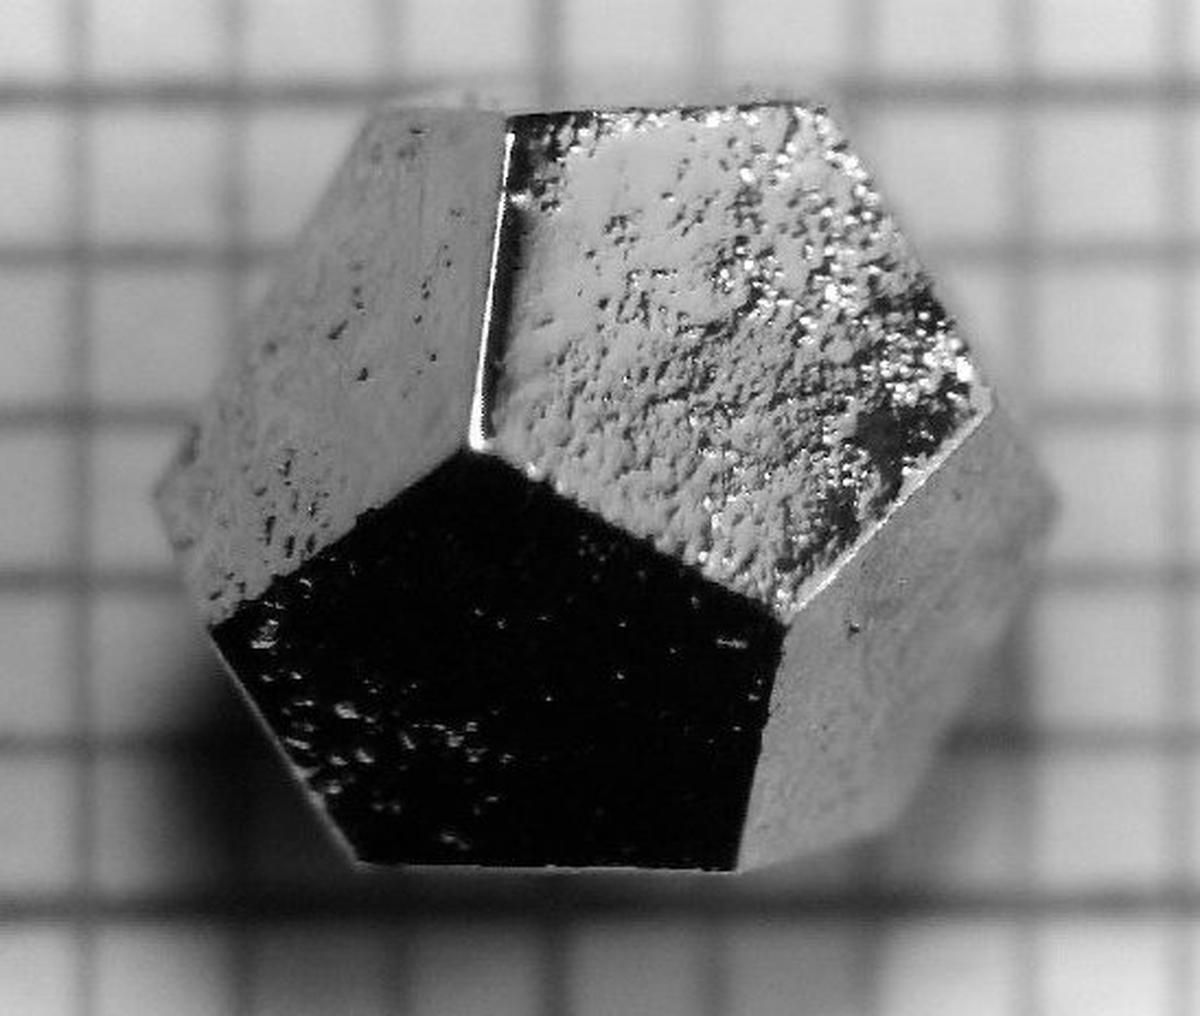 Photograph of a single-grain icosahedral Ho-Mg-Zn quasicrystal made in the lab. The edges are 2.2 mm long.